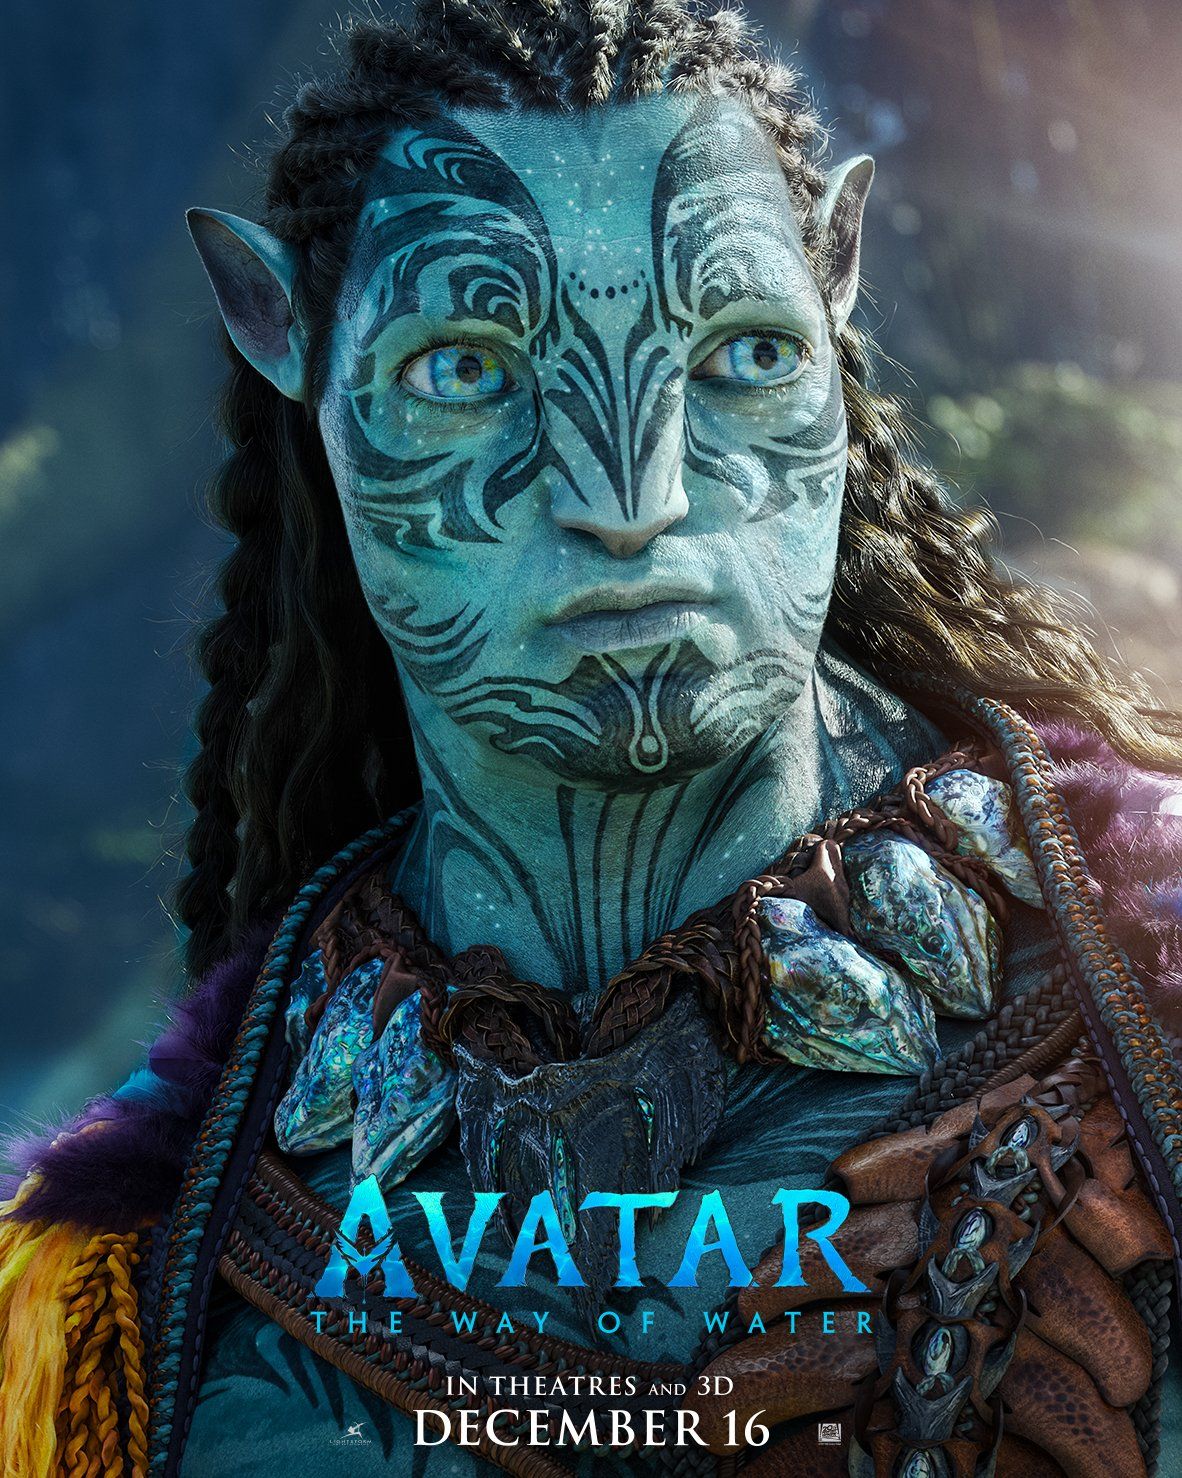 Avatar The Way of Water Posters Showcase the Film's New Characters